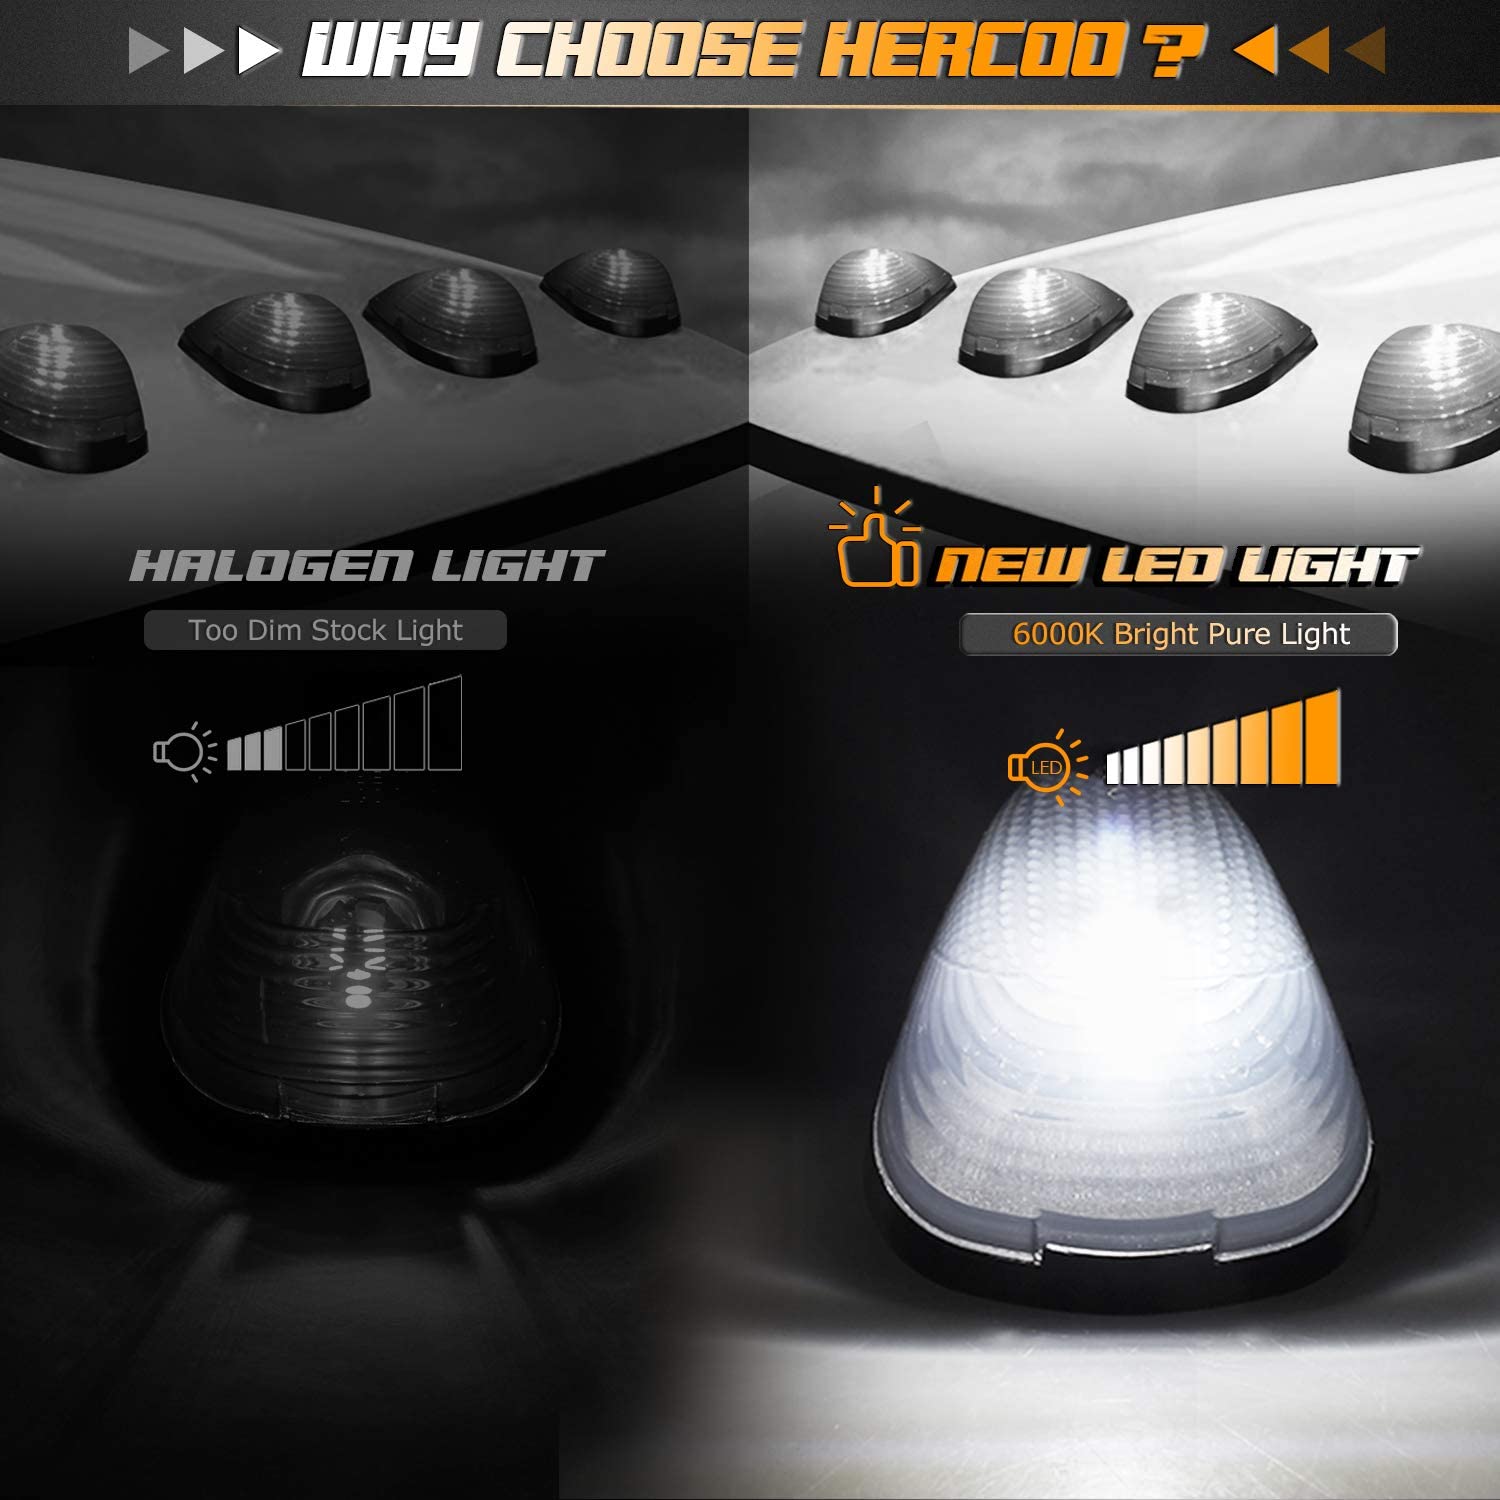 HERCOO Smoked LED Roof Lights White Cab Marker Clearance Running Compatible with 1999-2016 F250 F350 F450 F550 Super Duty Aftermarket Replacement